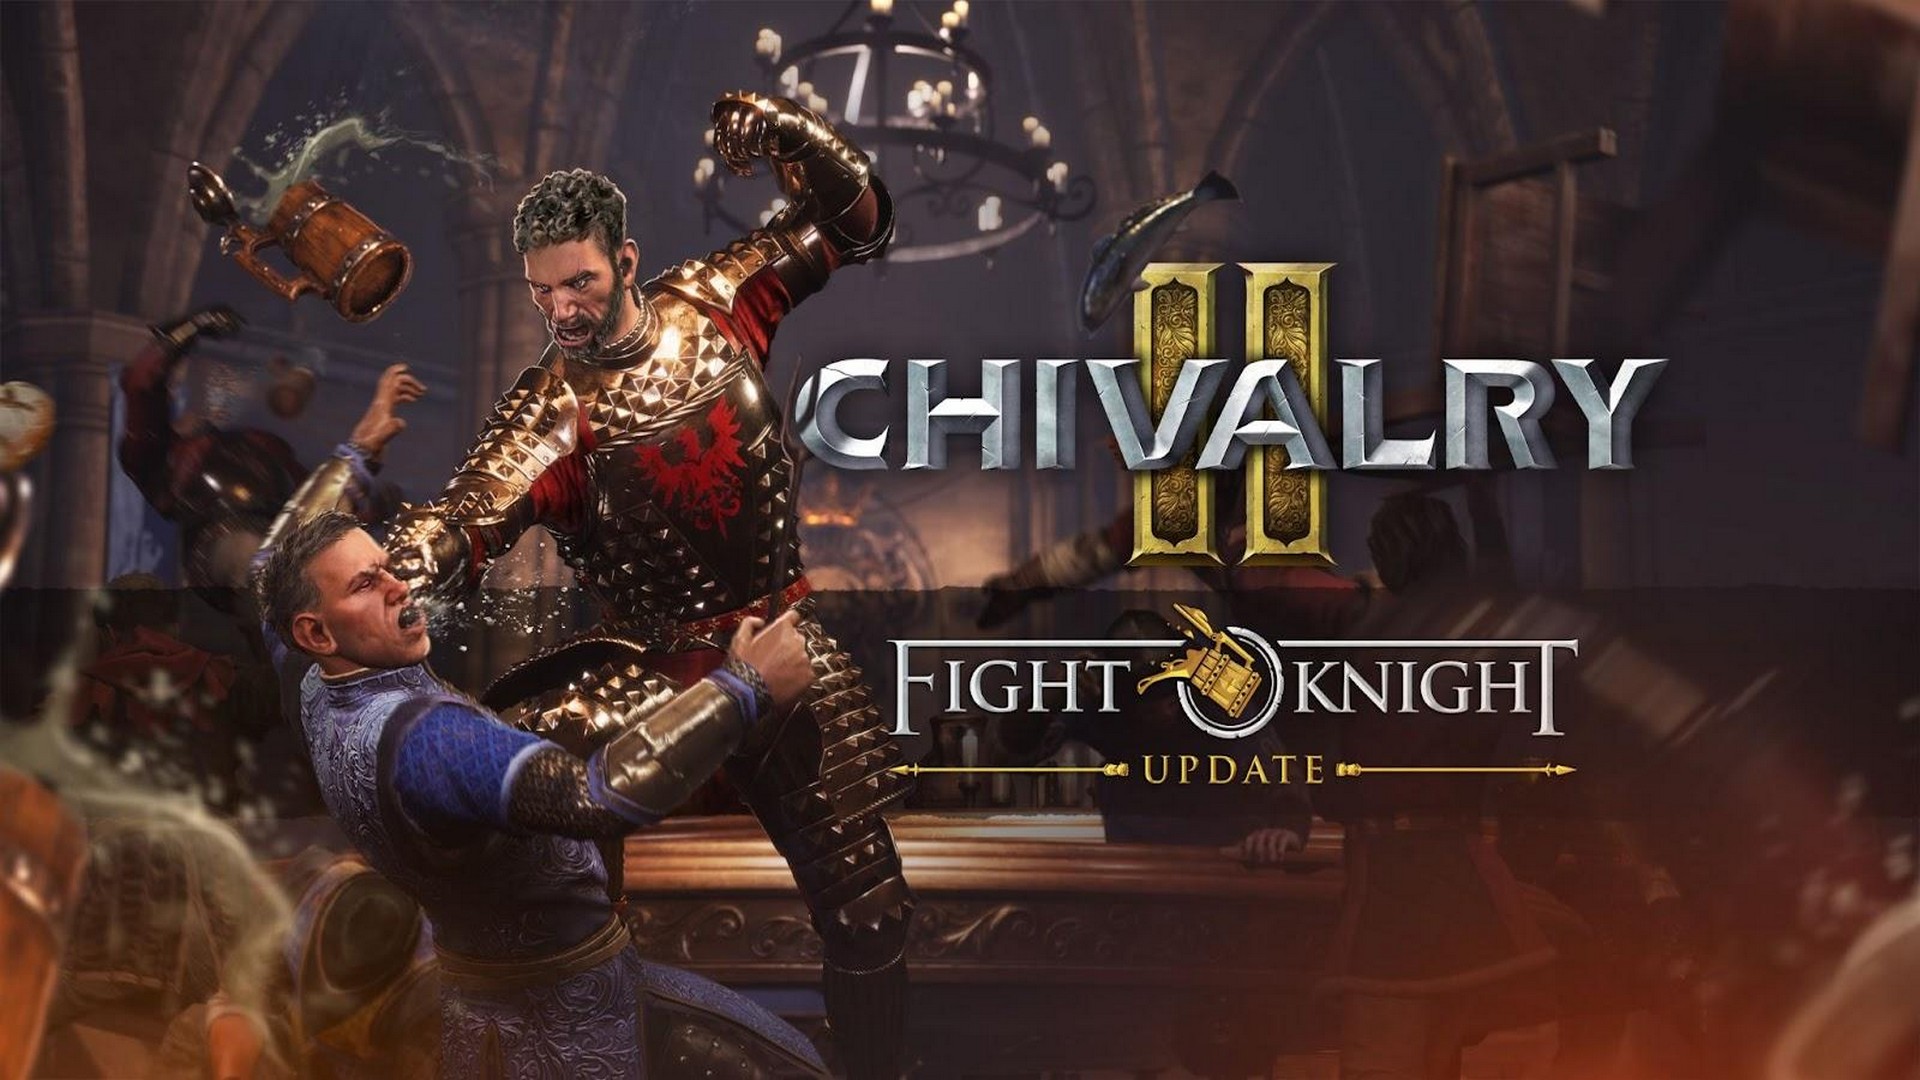 Chivalry 2: Fight Knight Update Adds Brawl Mode, Last Team Standing, The Rapier, Headbutts and More, Wrapped In A Limited-Time Halloween Event